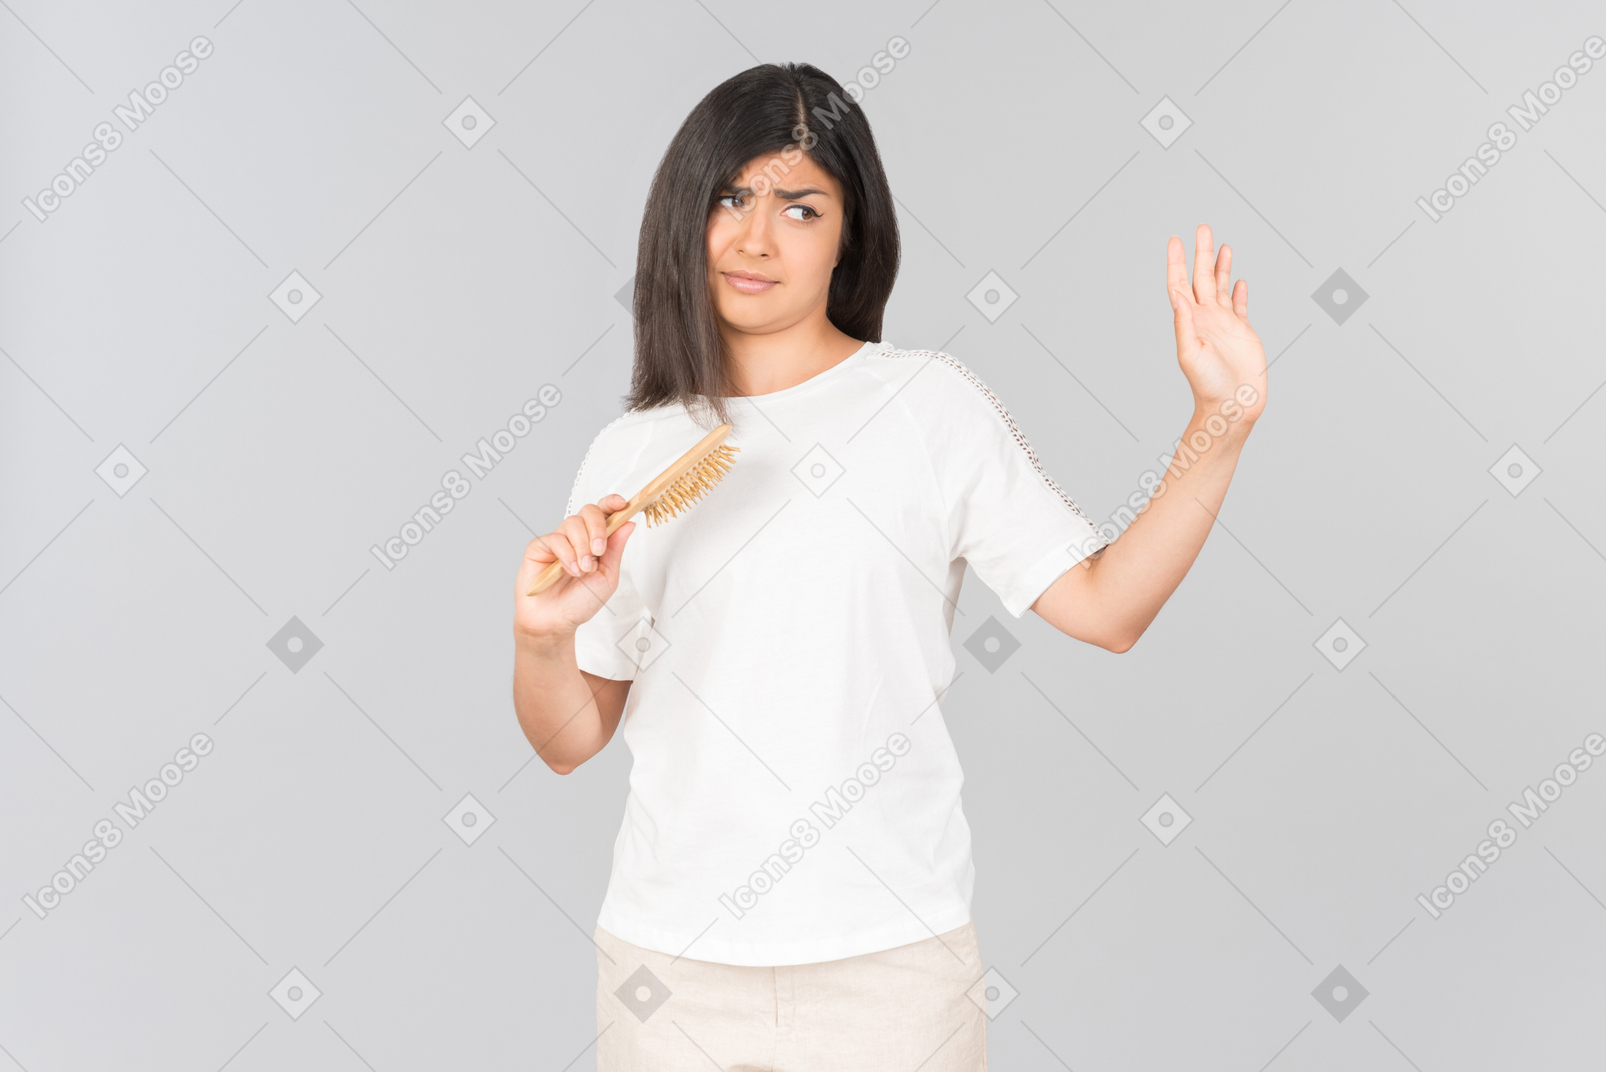 Dissatisfied young indian woman holding hairbrush